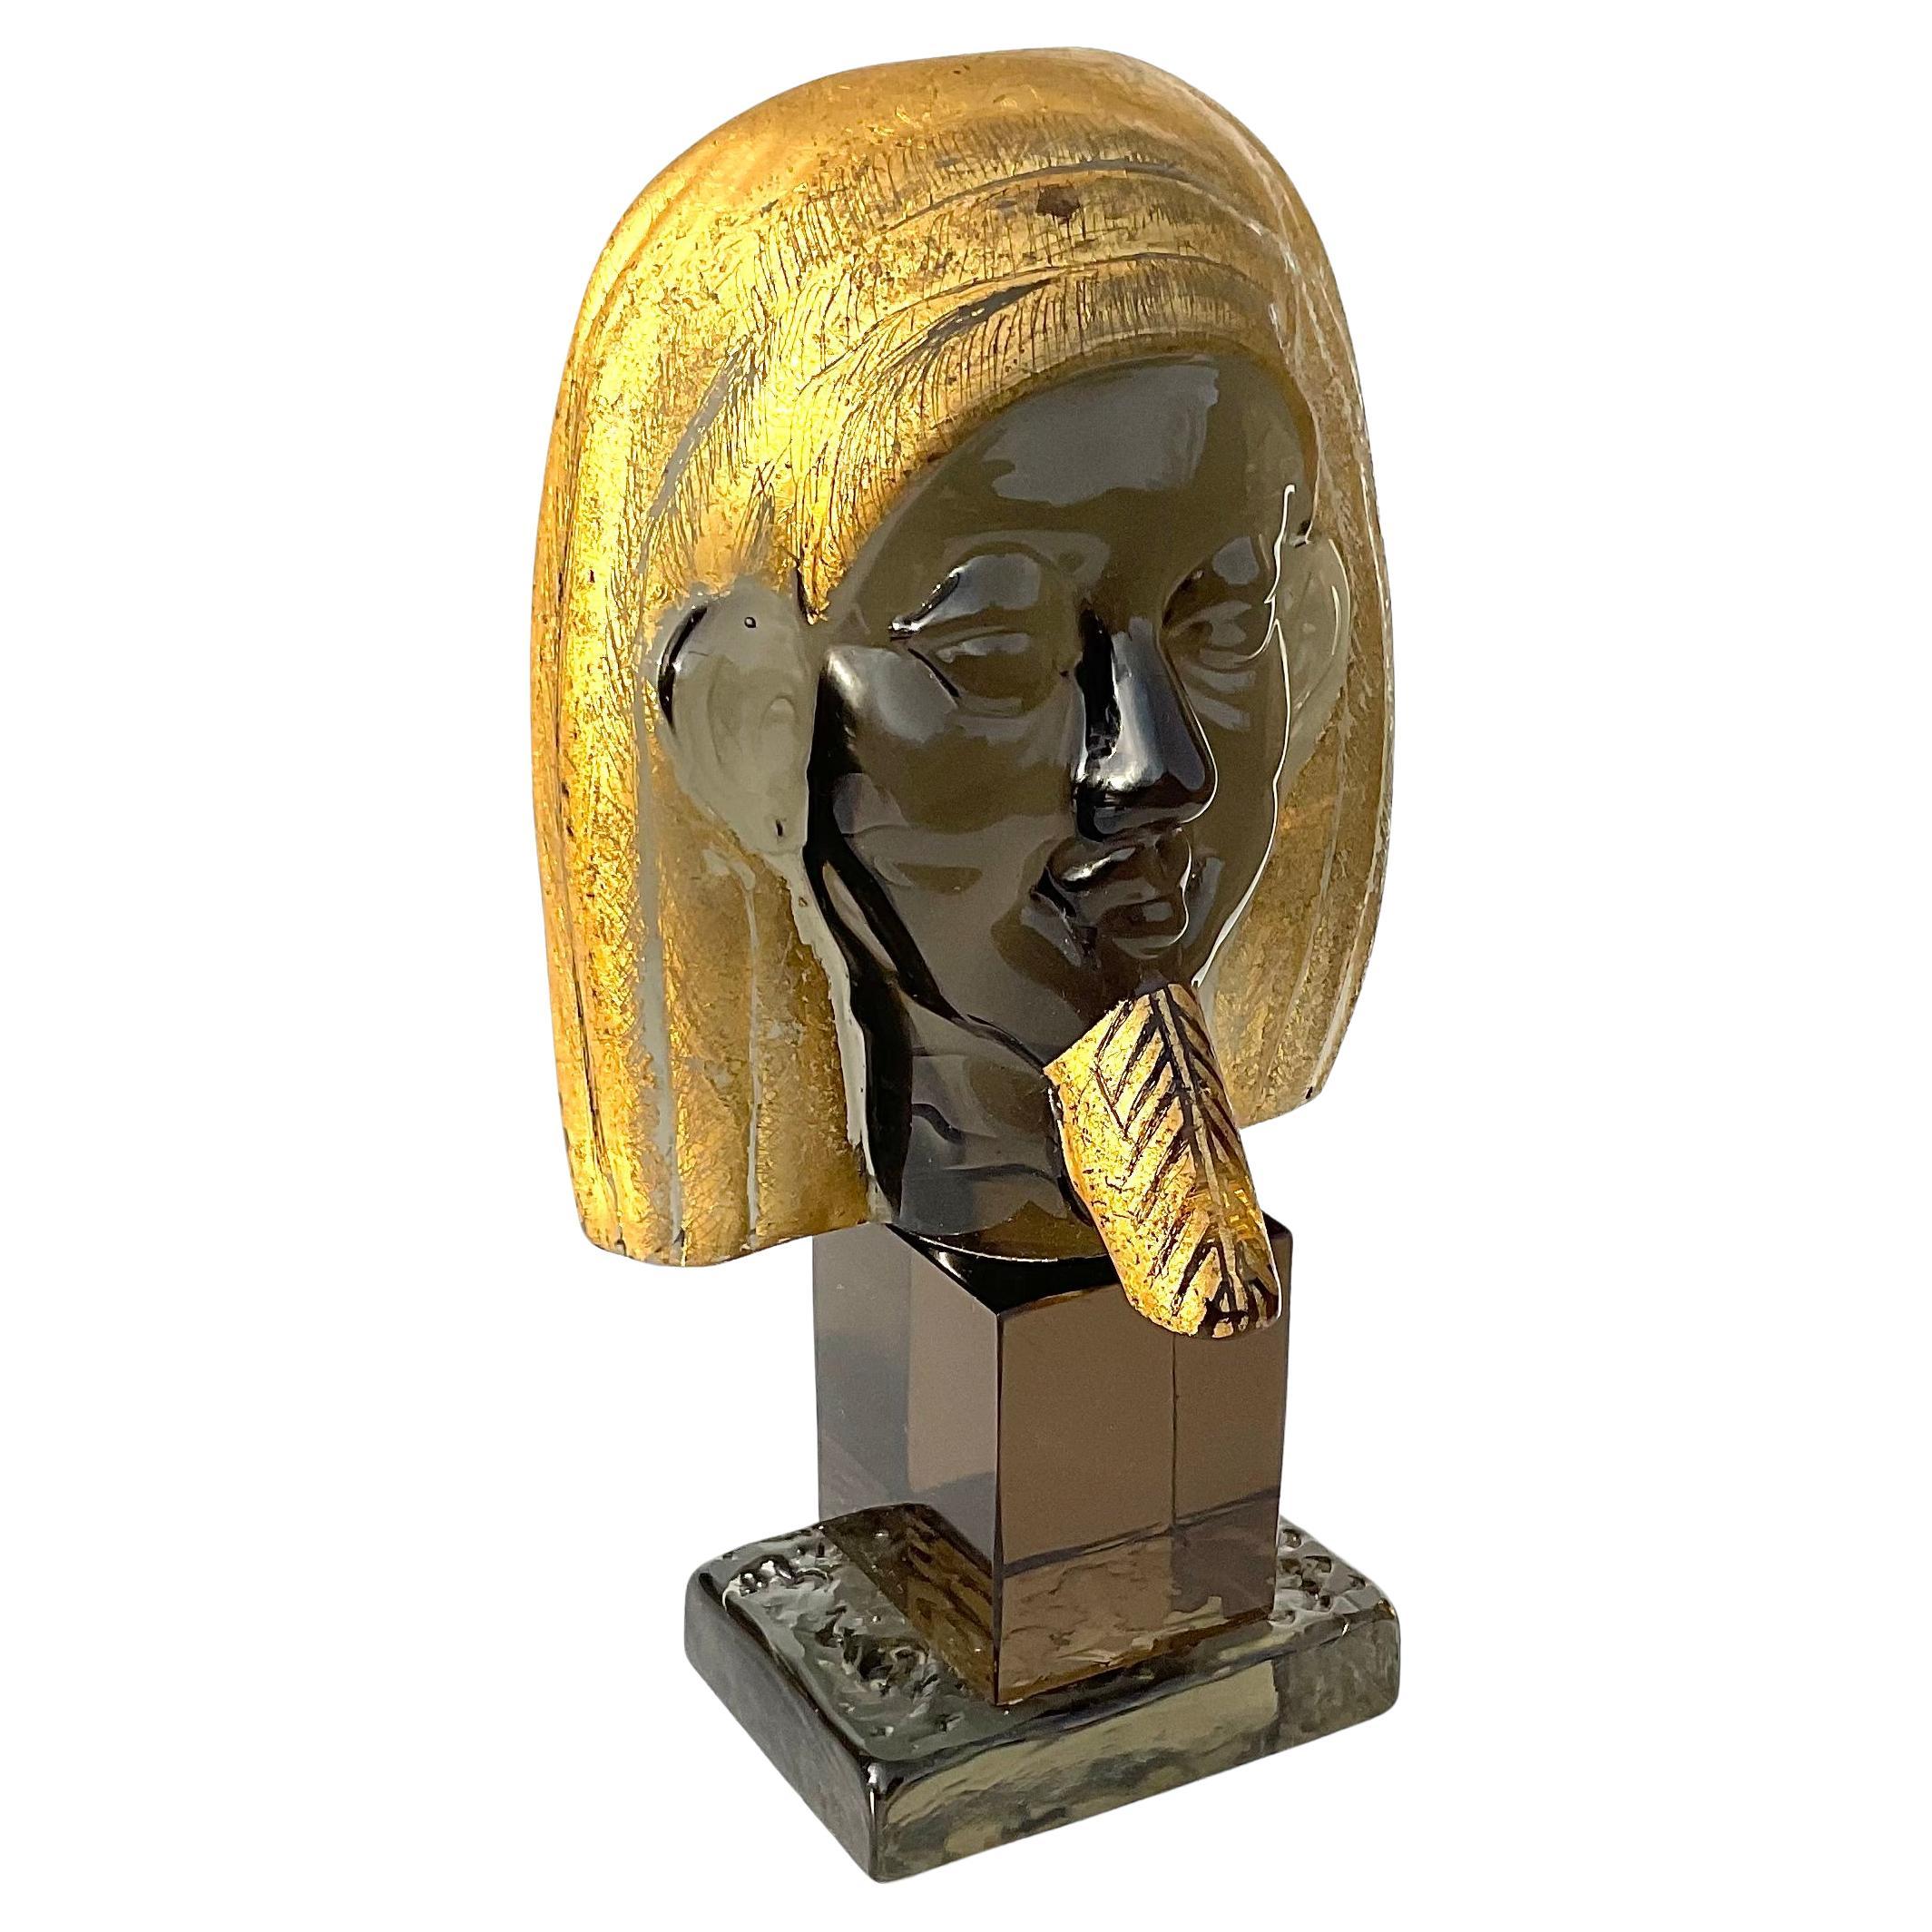 Ermanno Nason Murano Art Glass Sculpture of King Tut Signed and dated 1975  For Sale